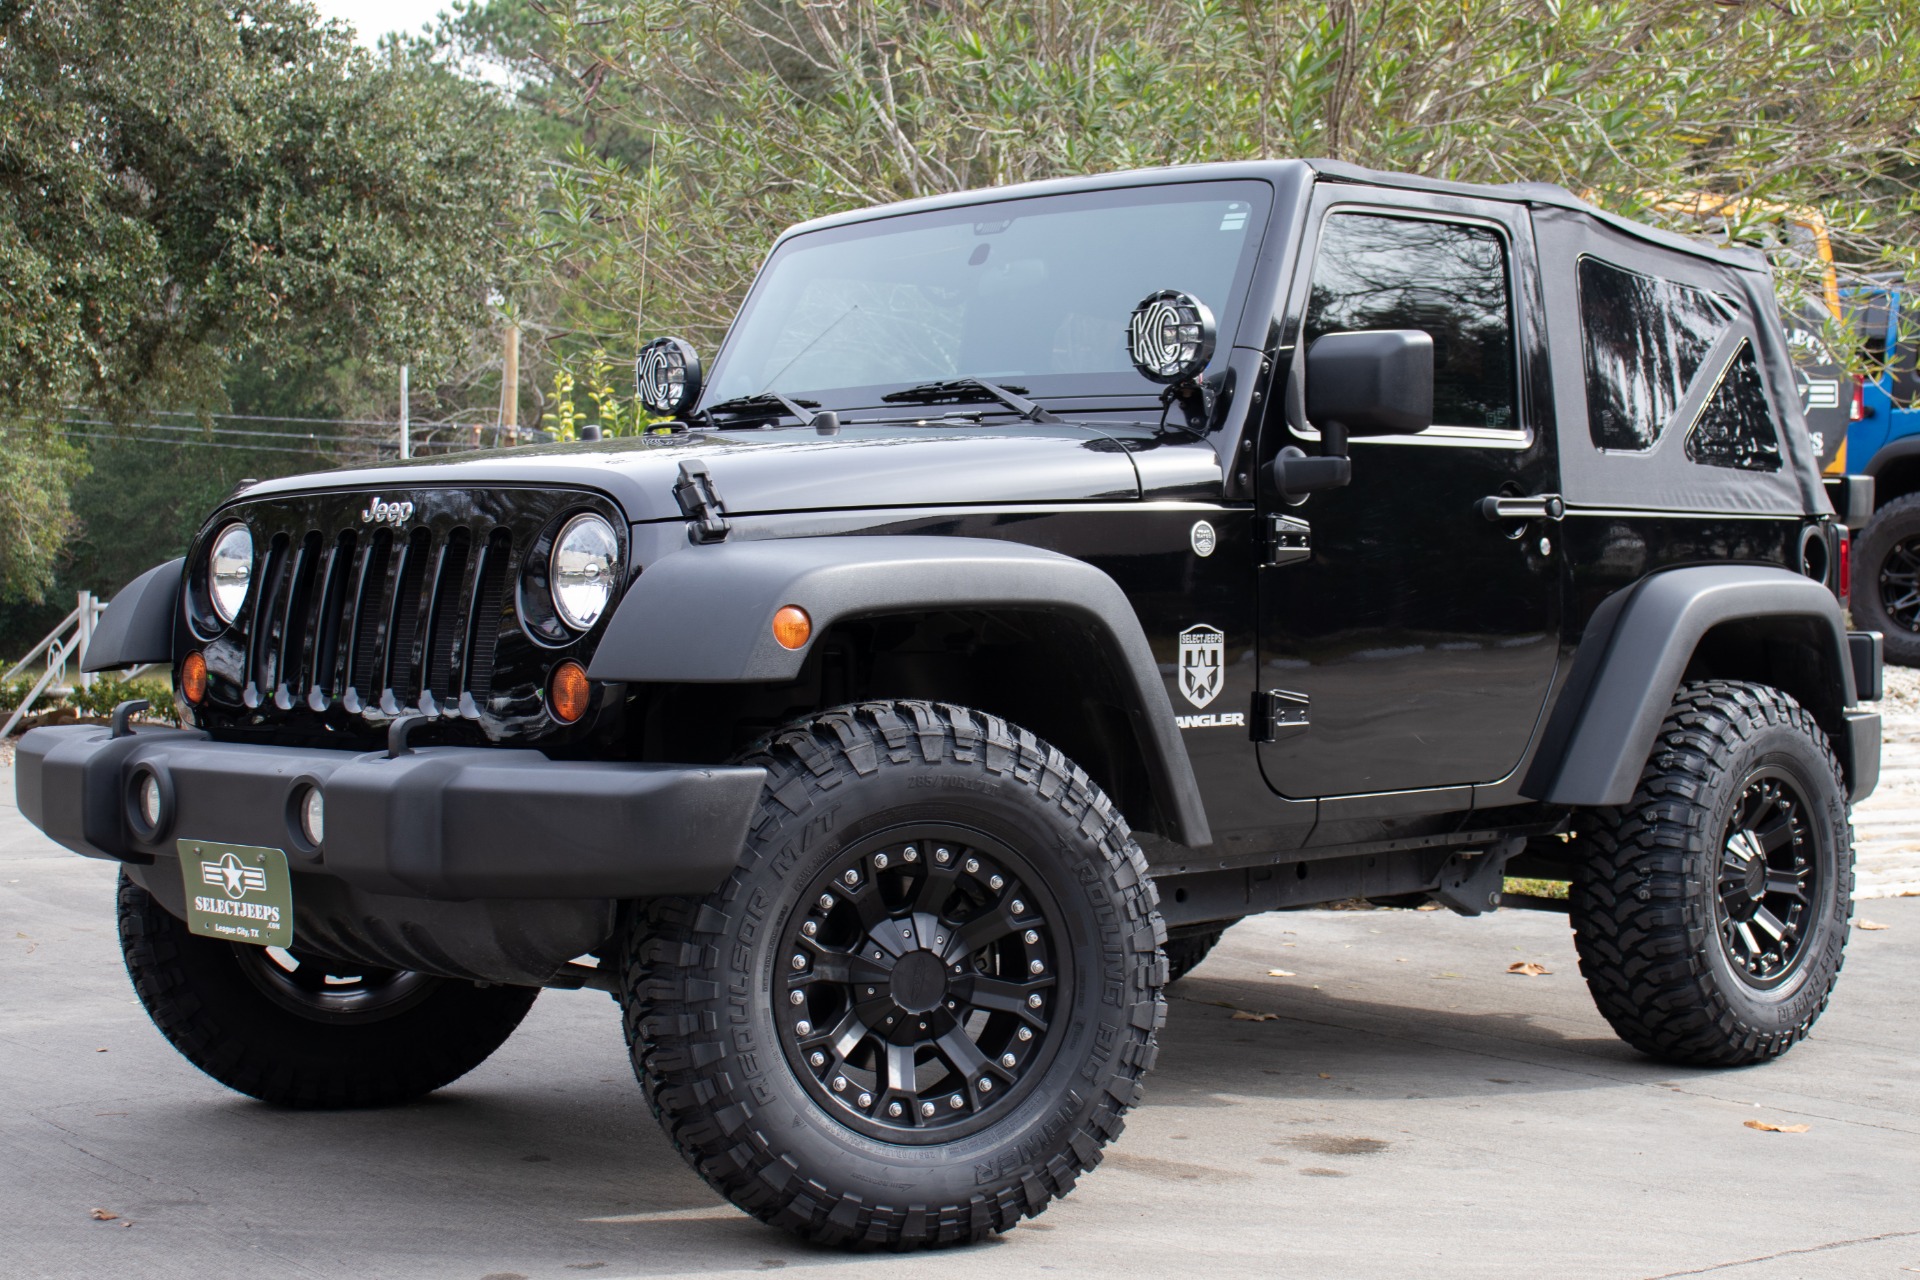 Jeeps lead list of Top 10 cheapest vehicles to insure